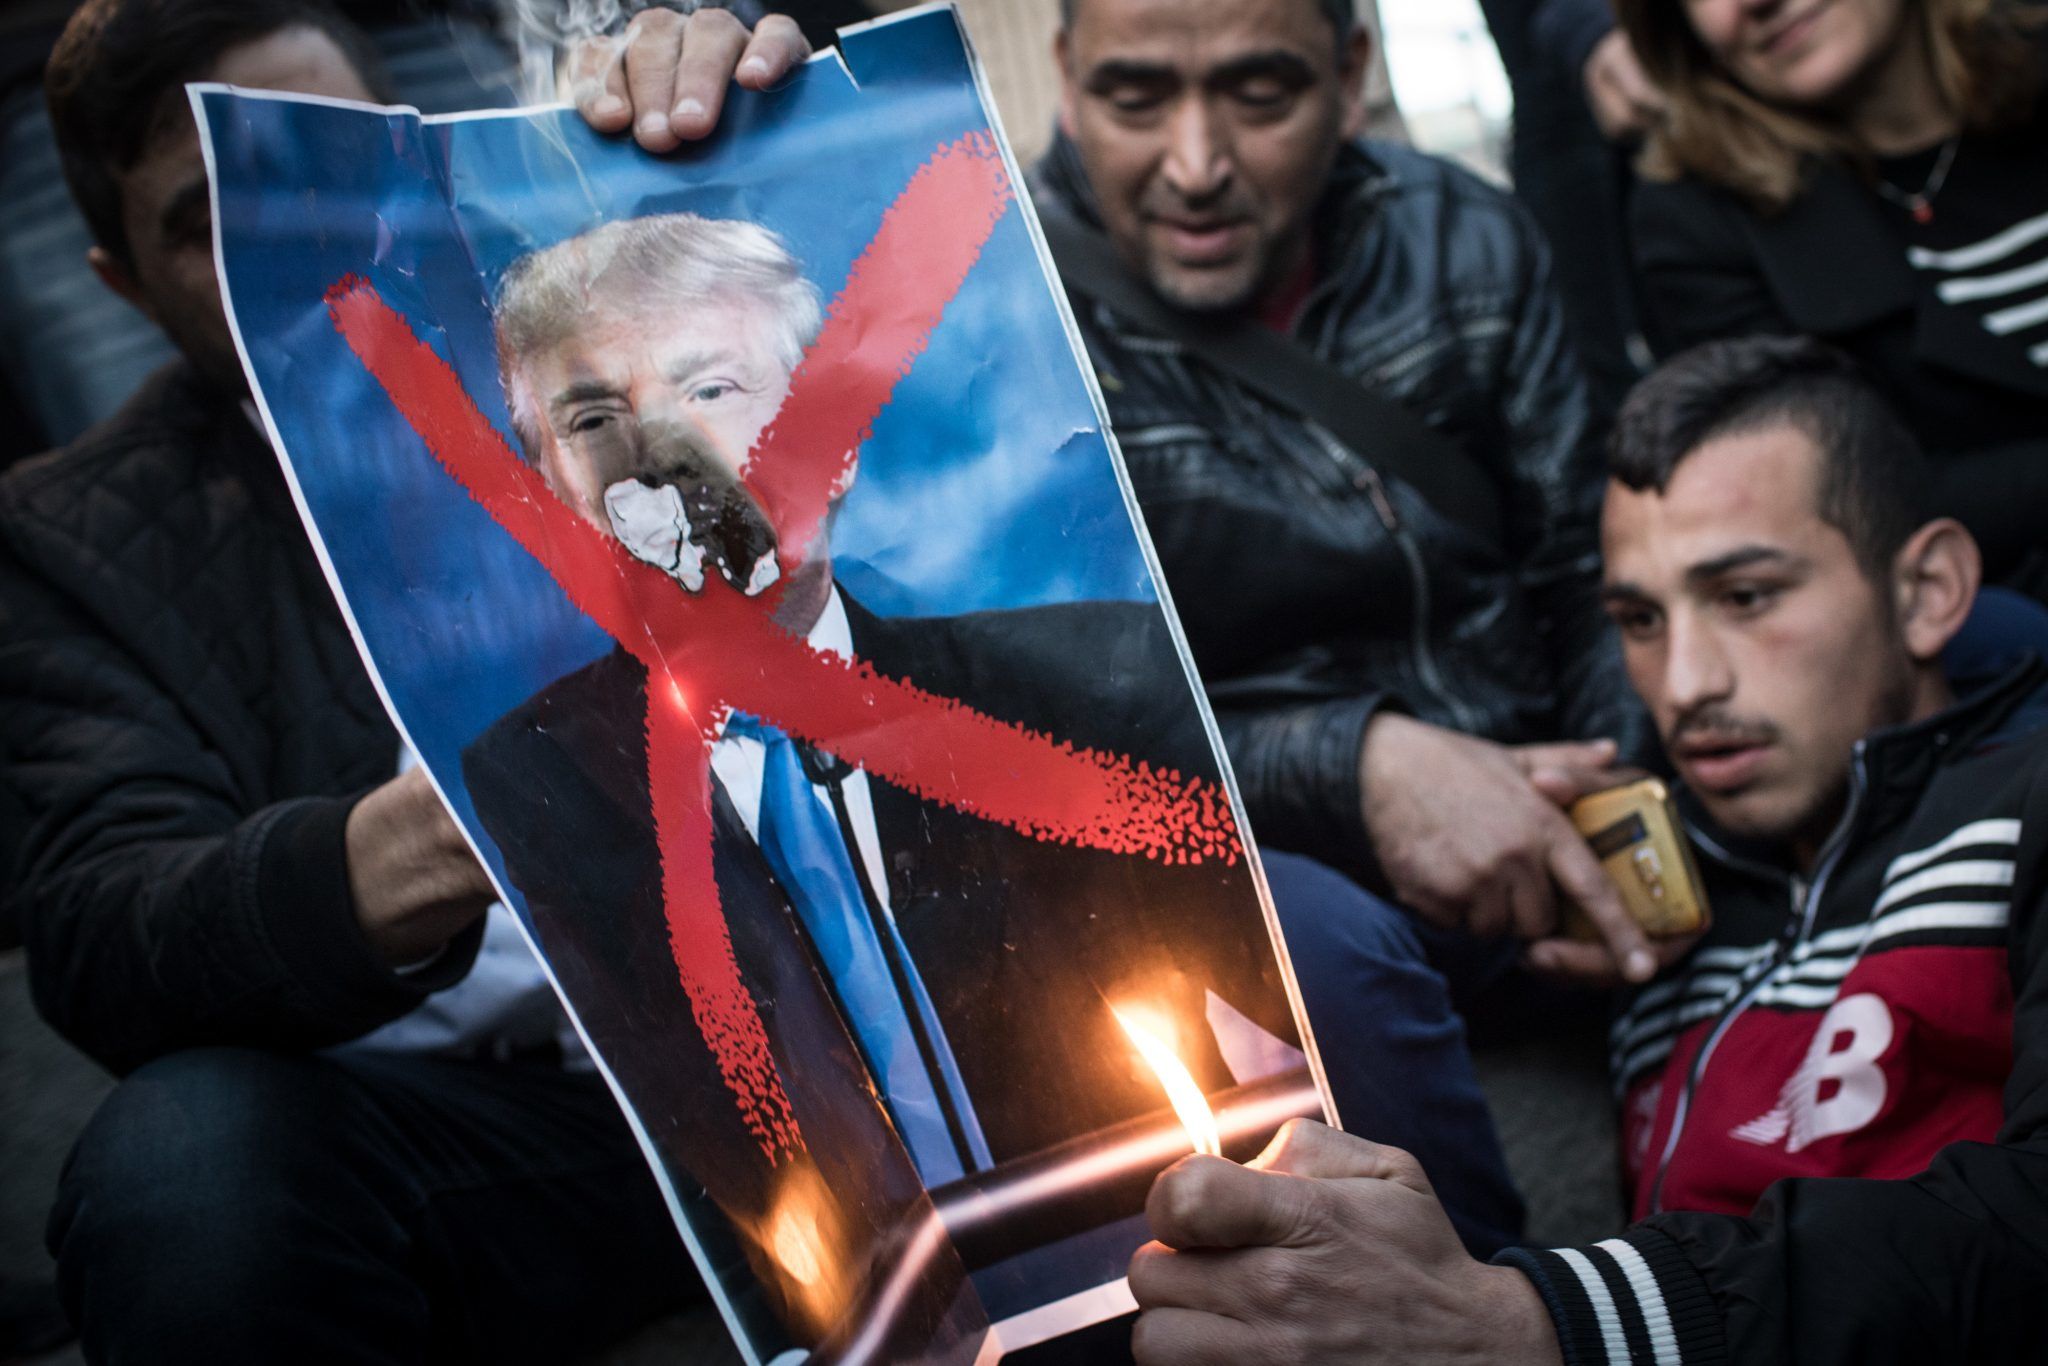 Protesters burning a poster of President Donald Trump